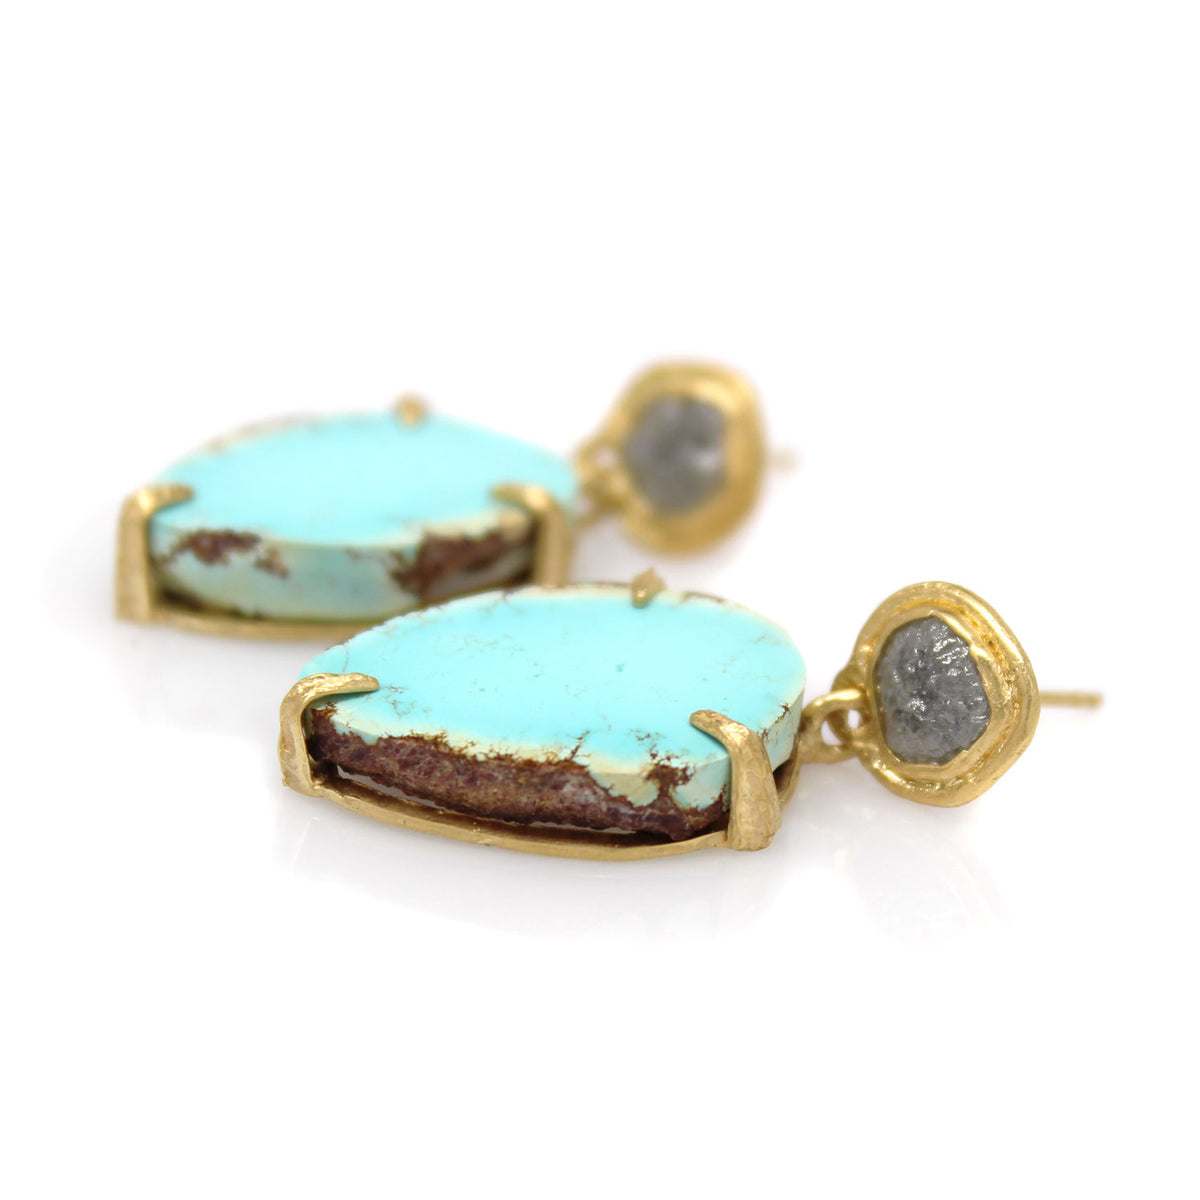 One-of-a-Kind Diamond and Turquoise Earrings